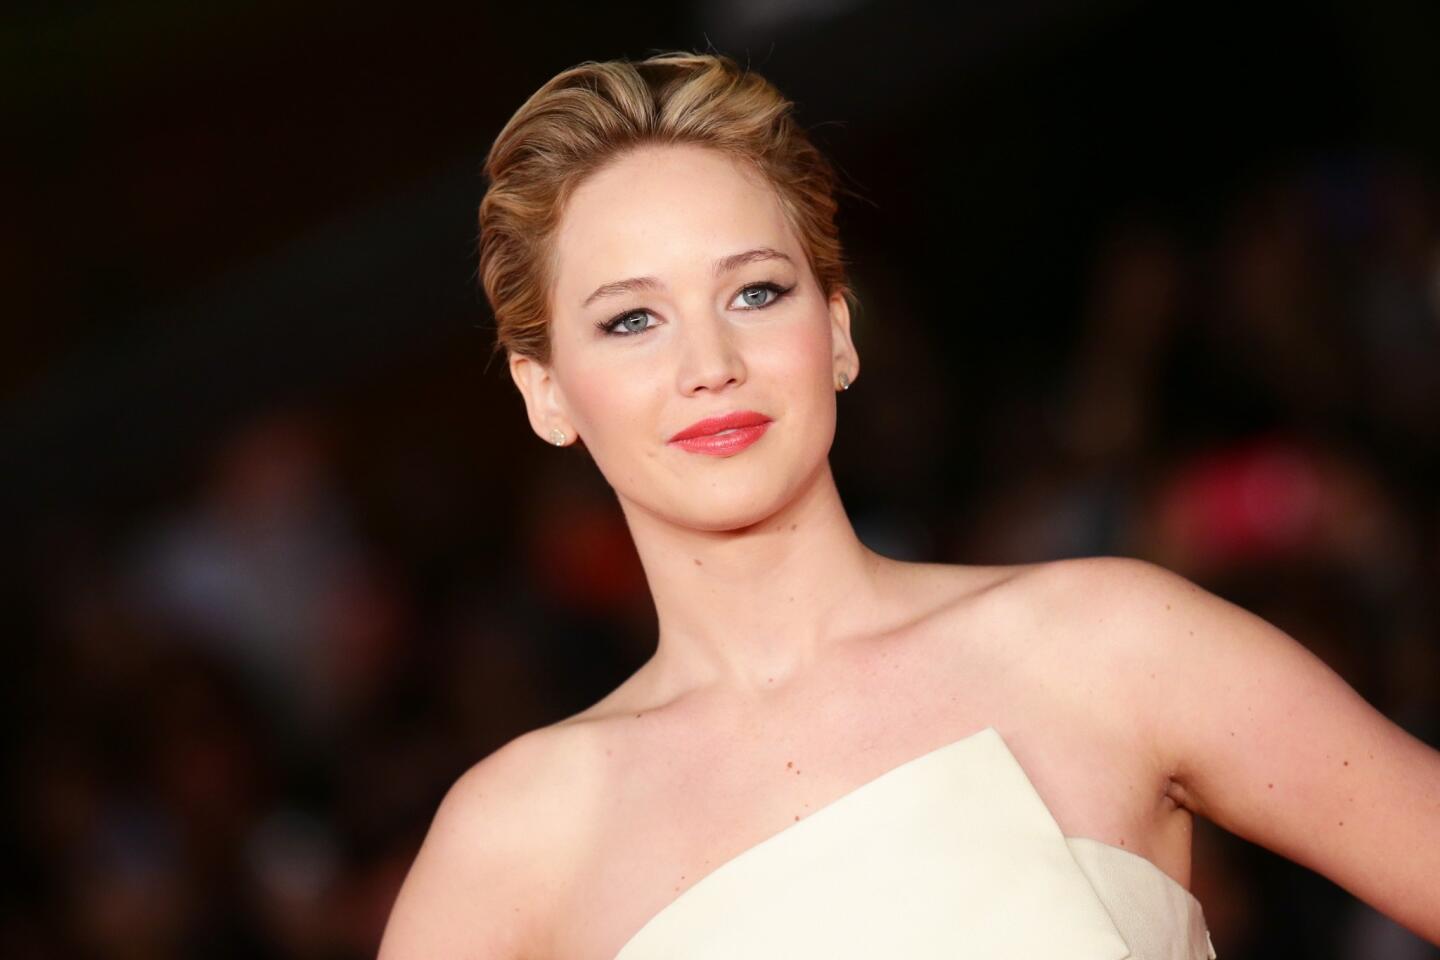 Jennifer Lawrence speaks her mind about jabs at weight